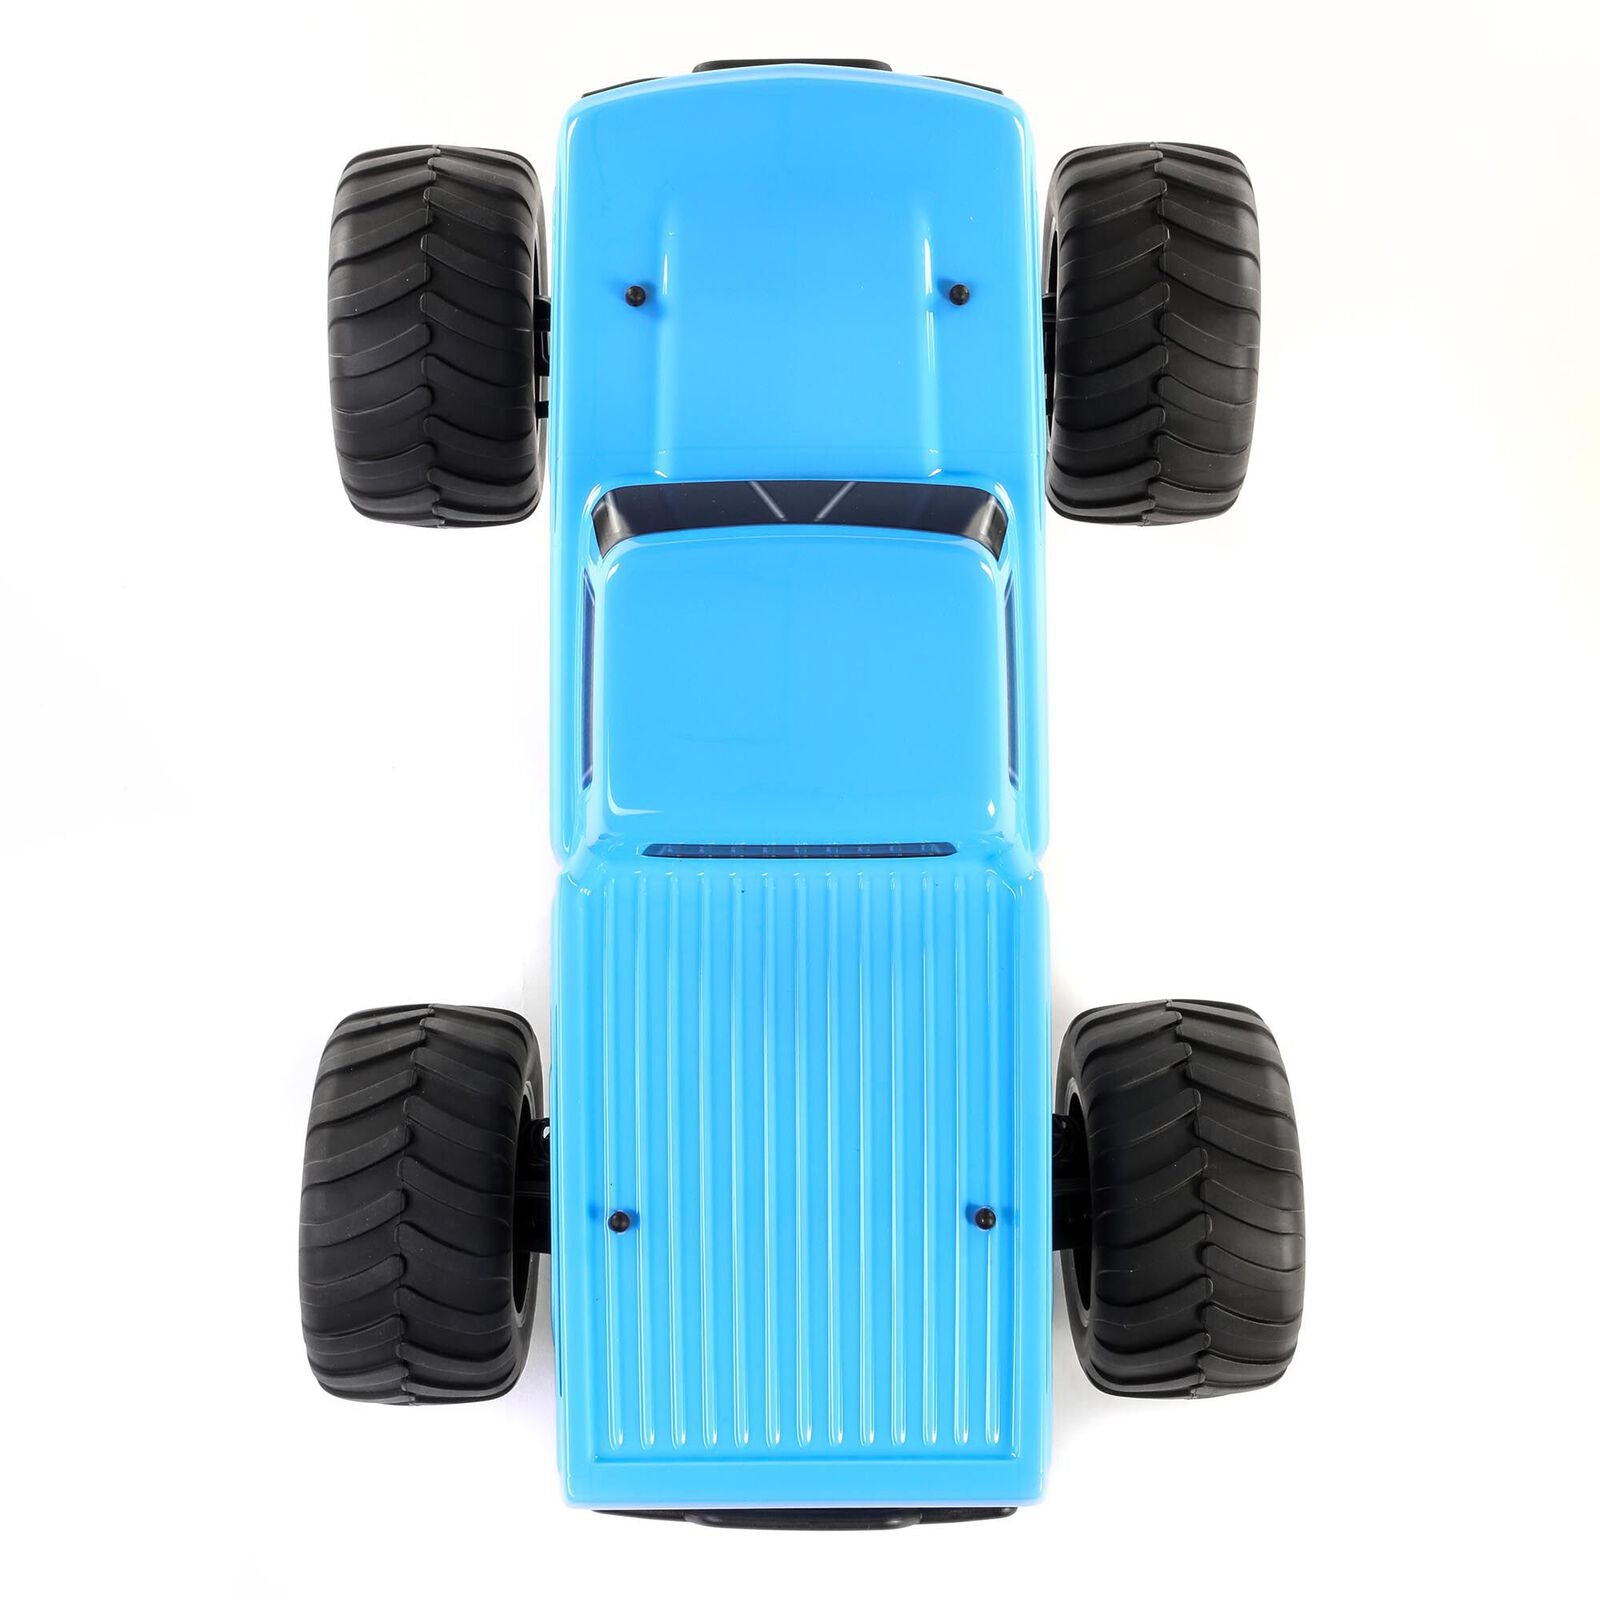 *DISCONTINUED* 1/10 Amp Crush 2WD Monster Truck Brushed RTR (Blue)